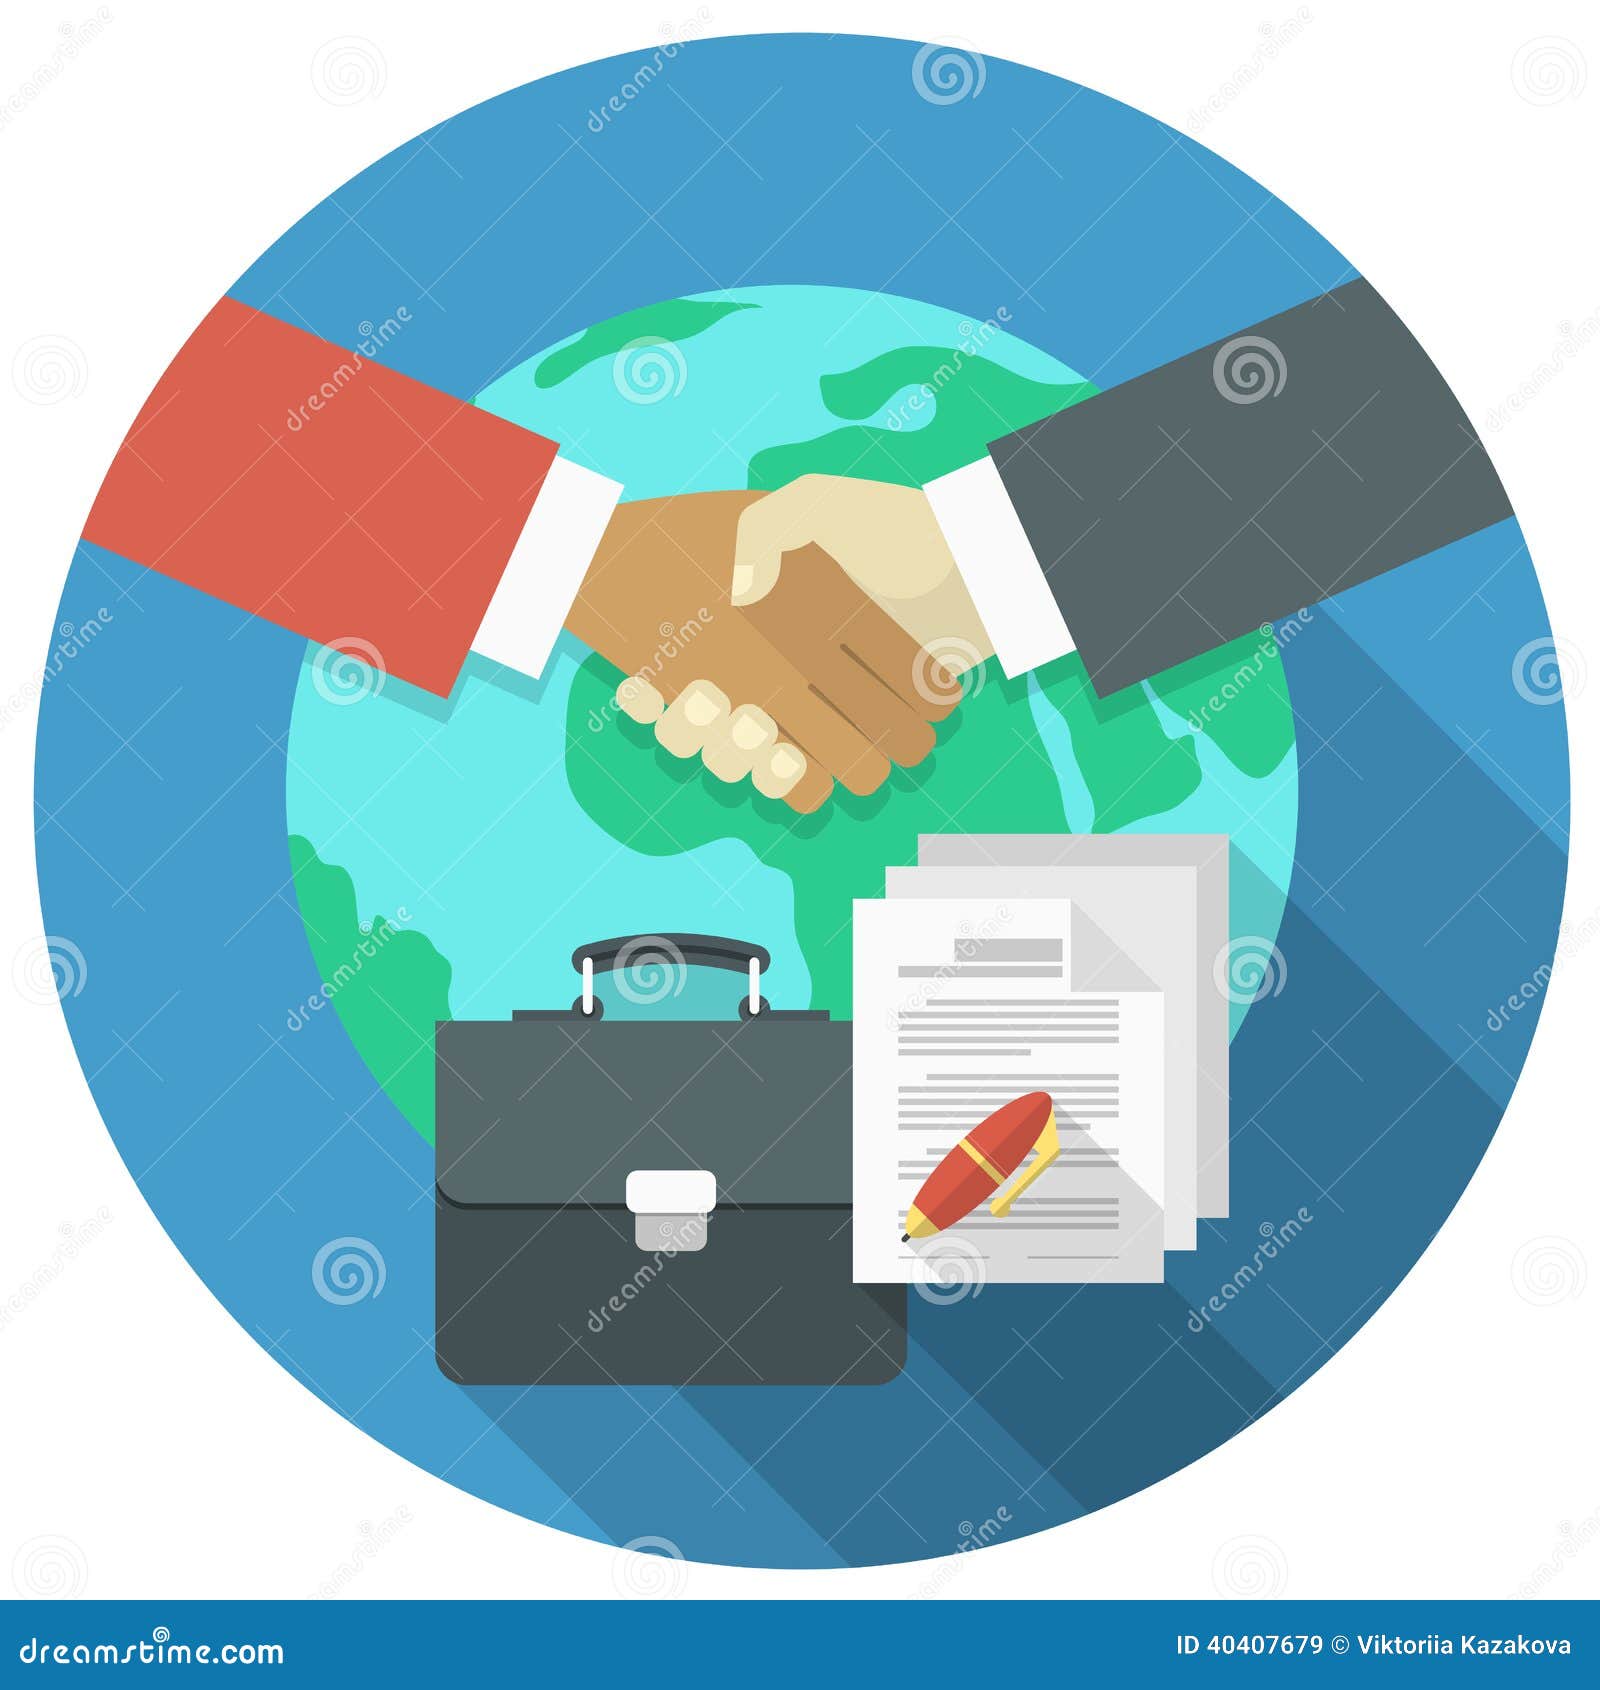 global business clipart - photo #45